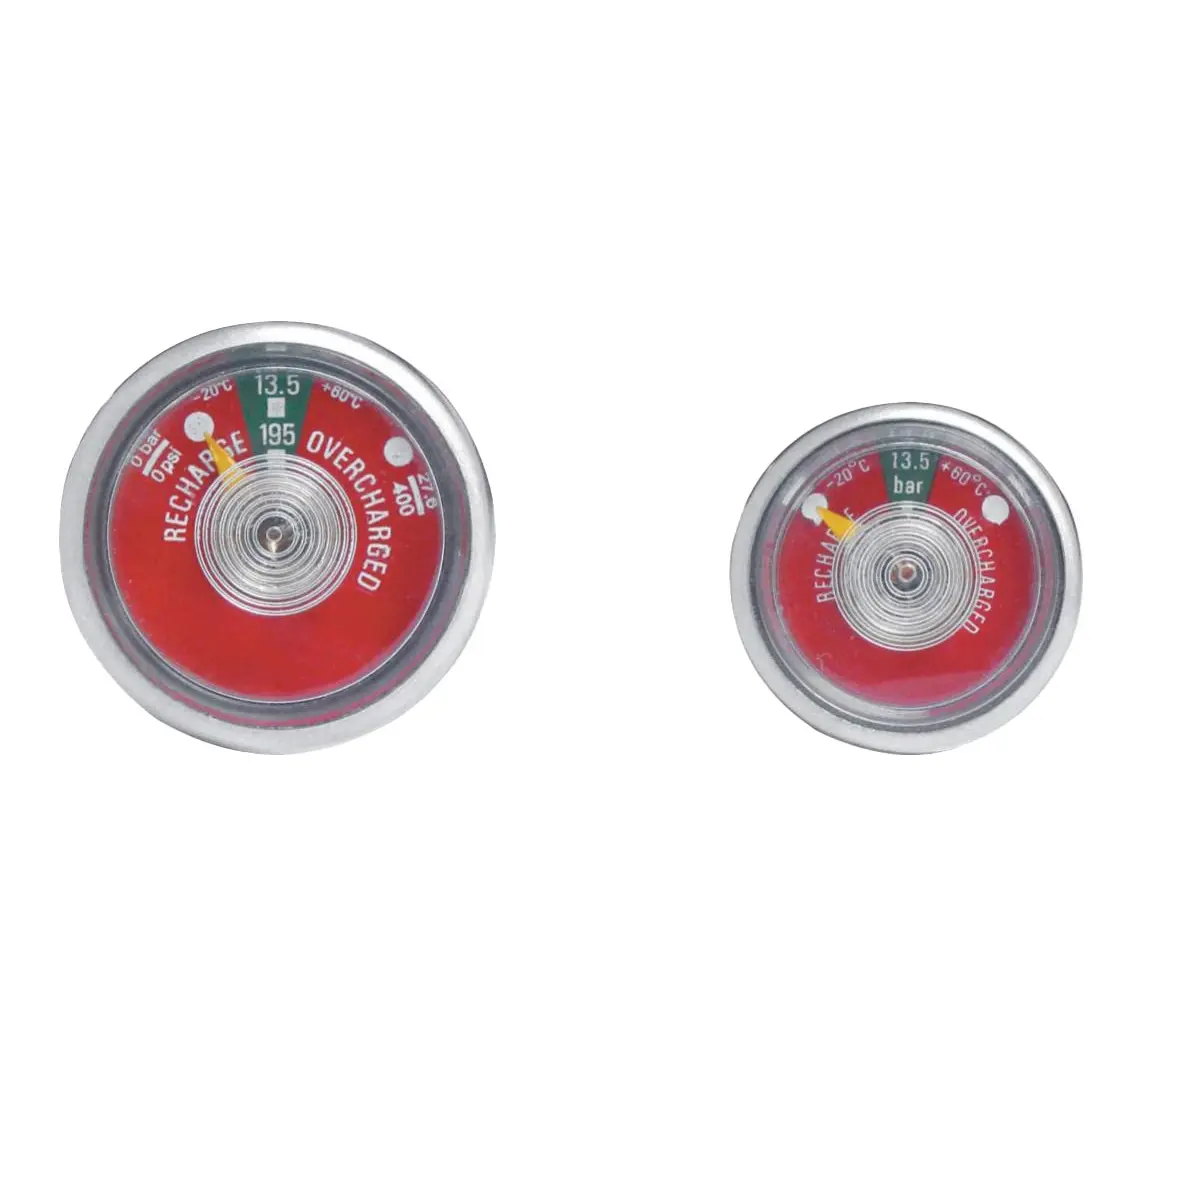 Factory Supply High Quality Dry powder fire extinguisher pressure gauge for fire extinguisher Support OEM customized service